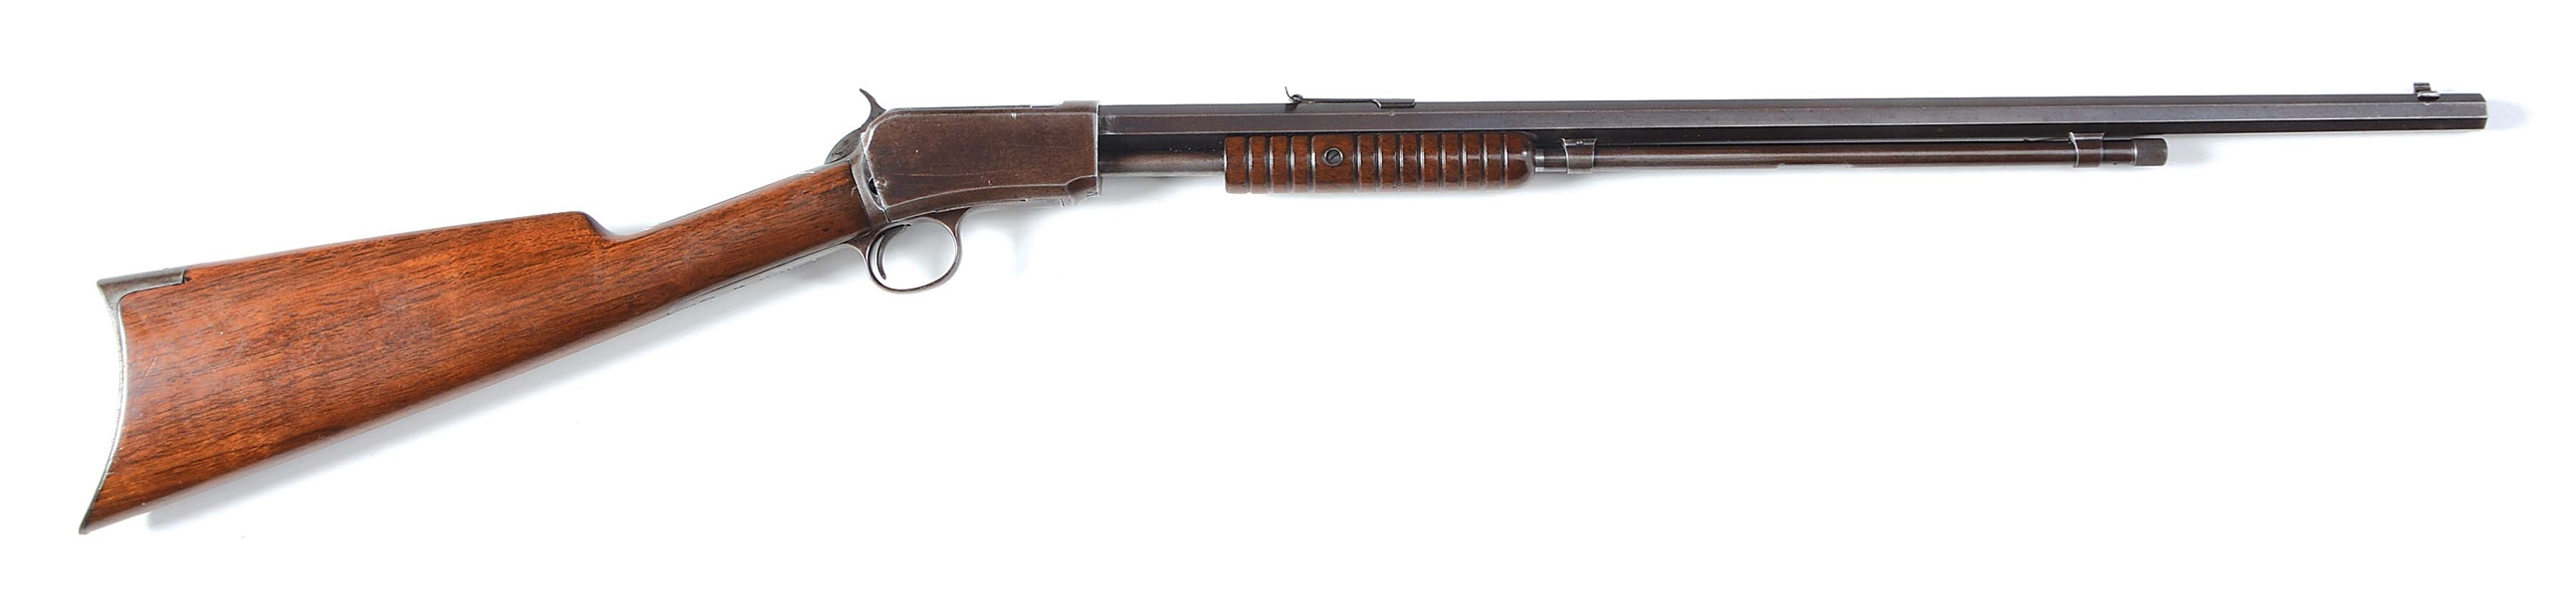 (C) WINCHESTER MODEL 1890 PUMP ACTION RIFLE (1907).